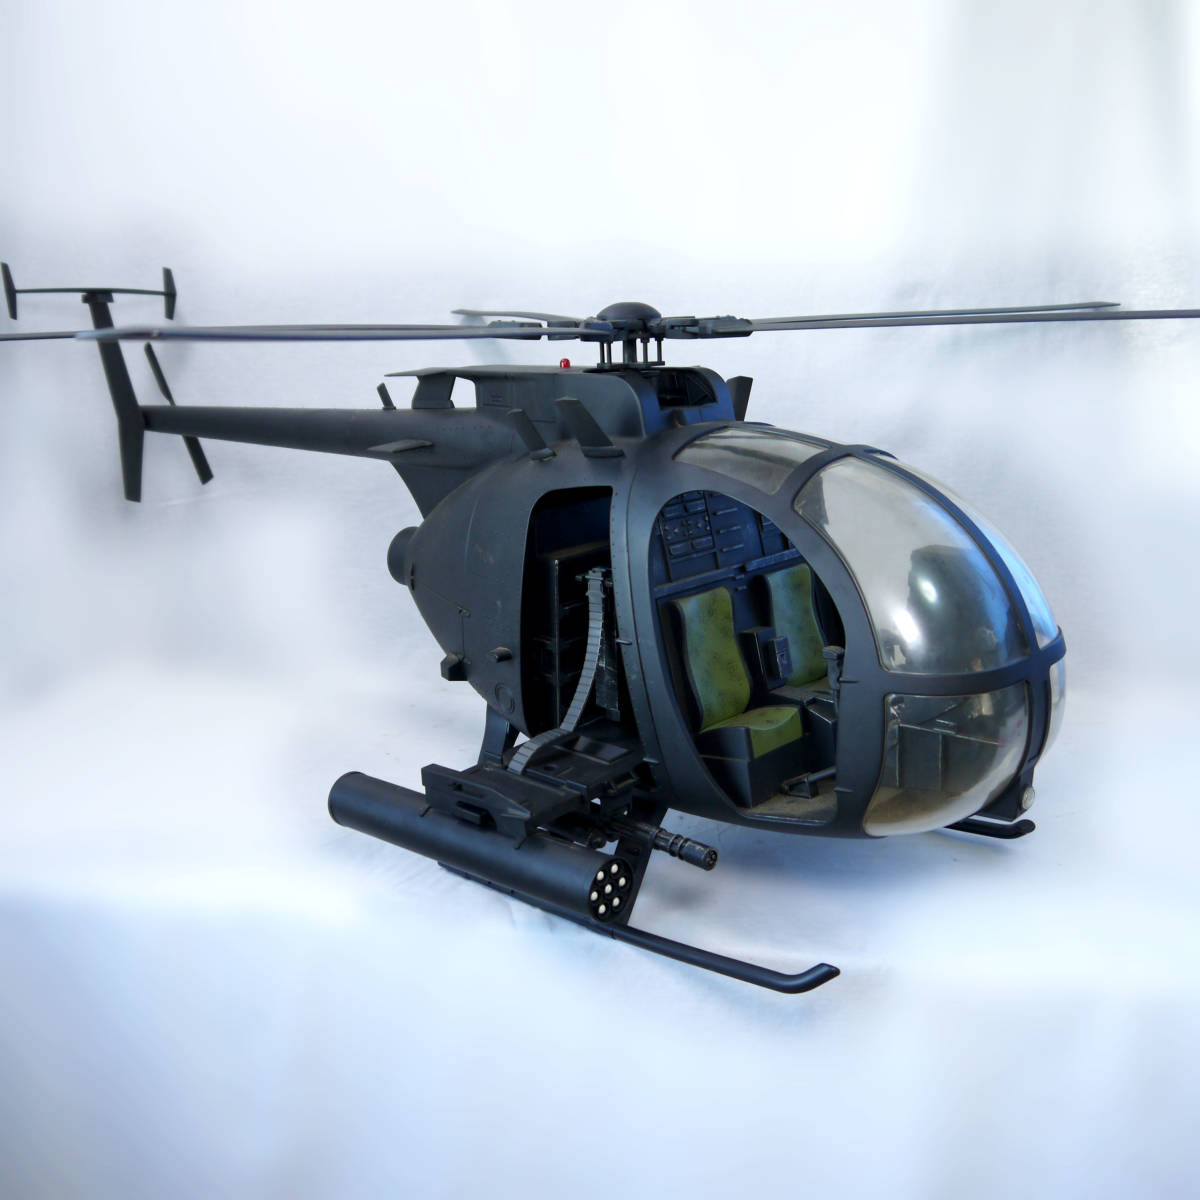 21ST CENTURY TOYS THE ULTIMATE SOLDIER「AH-6 LITTLE BIRD HELICOPTER」 ミリタリー ヘリコプター アルティメットソルジャー　011301